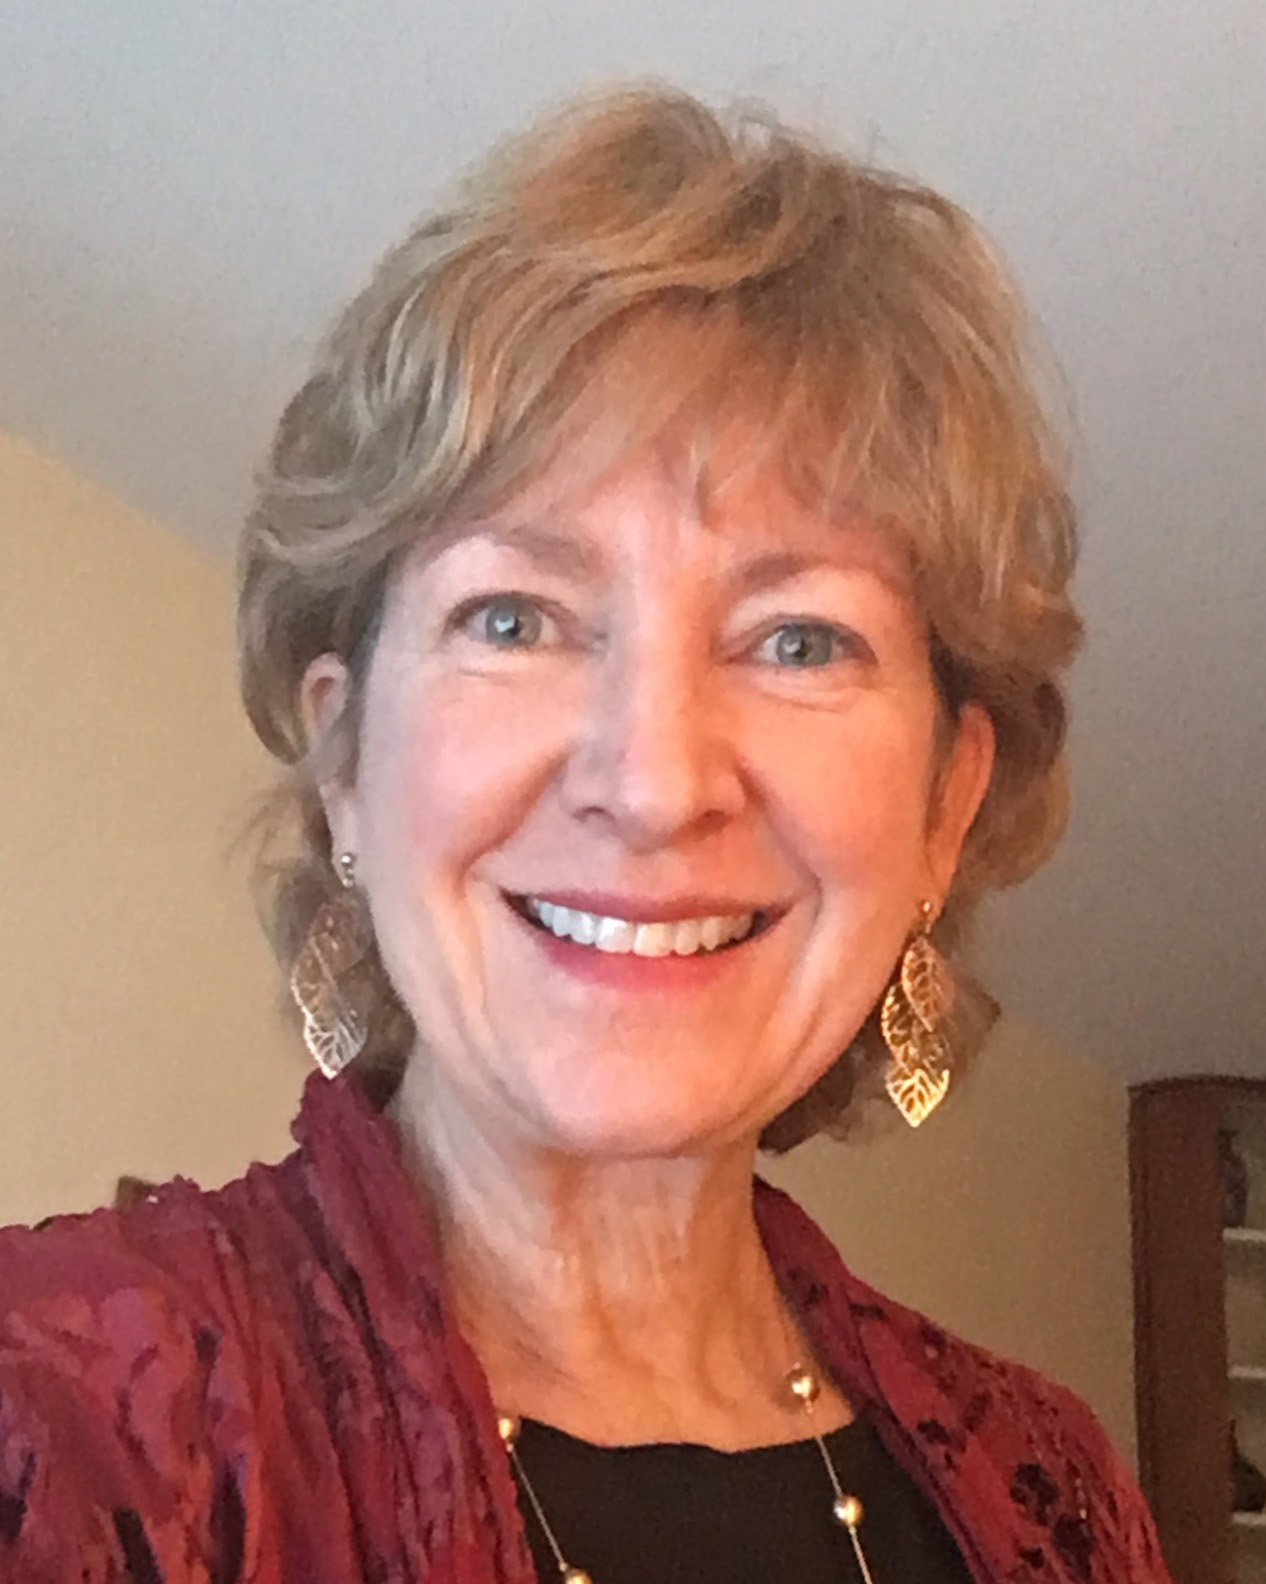 Award-Winning Author Laurel McHargue is the Founder of the Leadville Literary League.